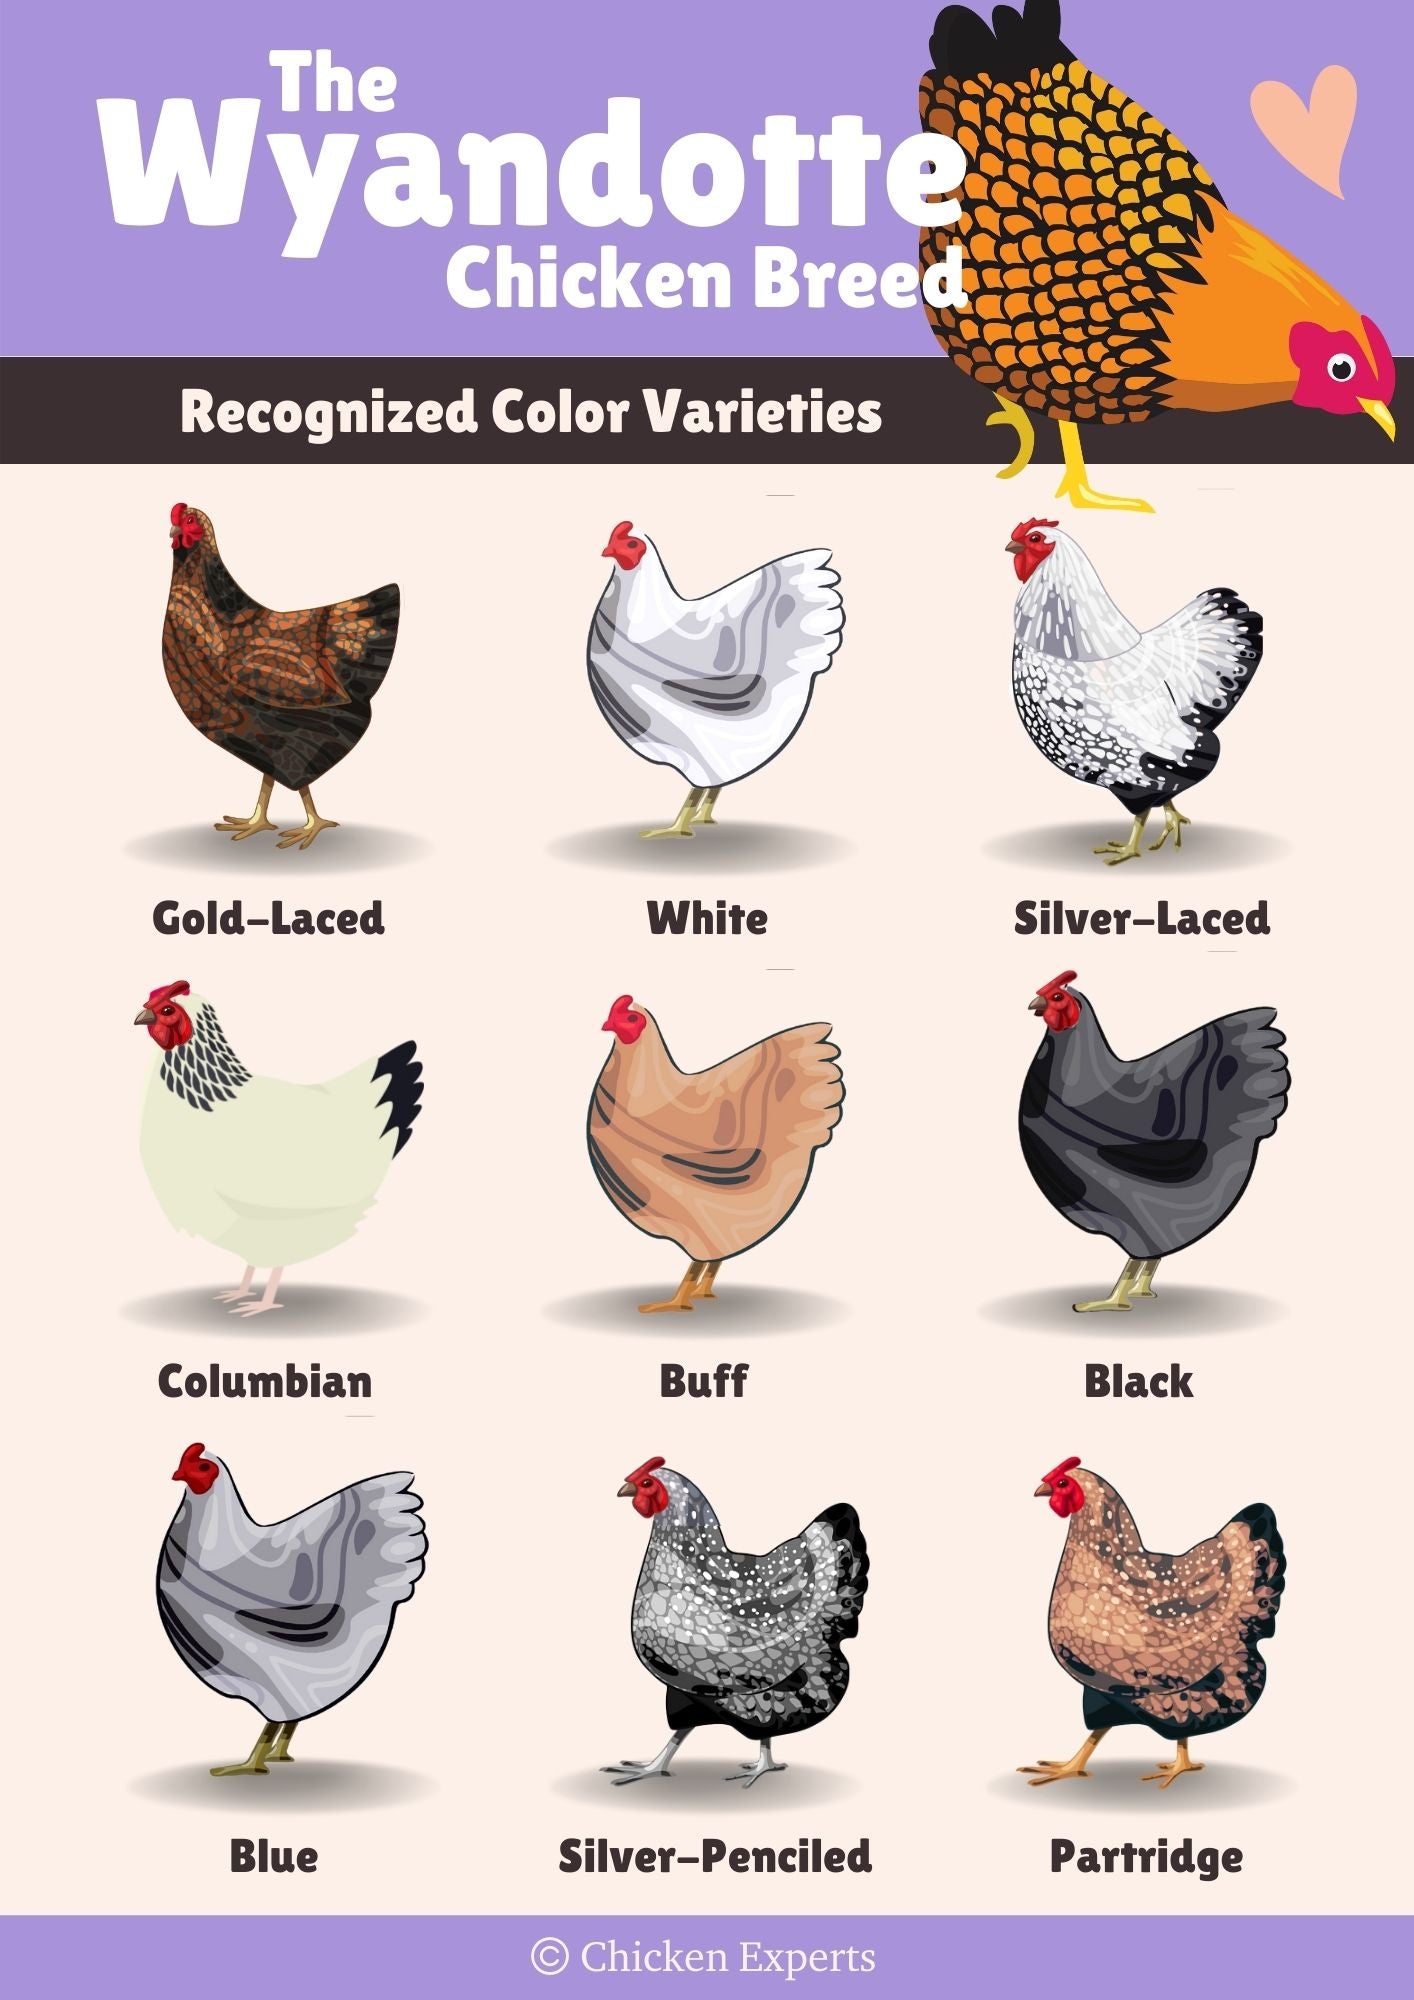 the wyandotte chicken breed color variety